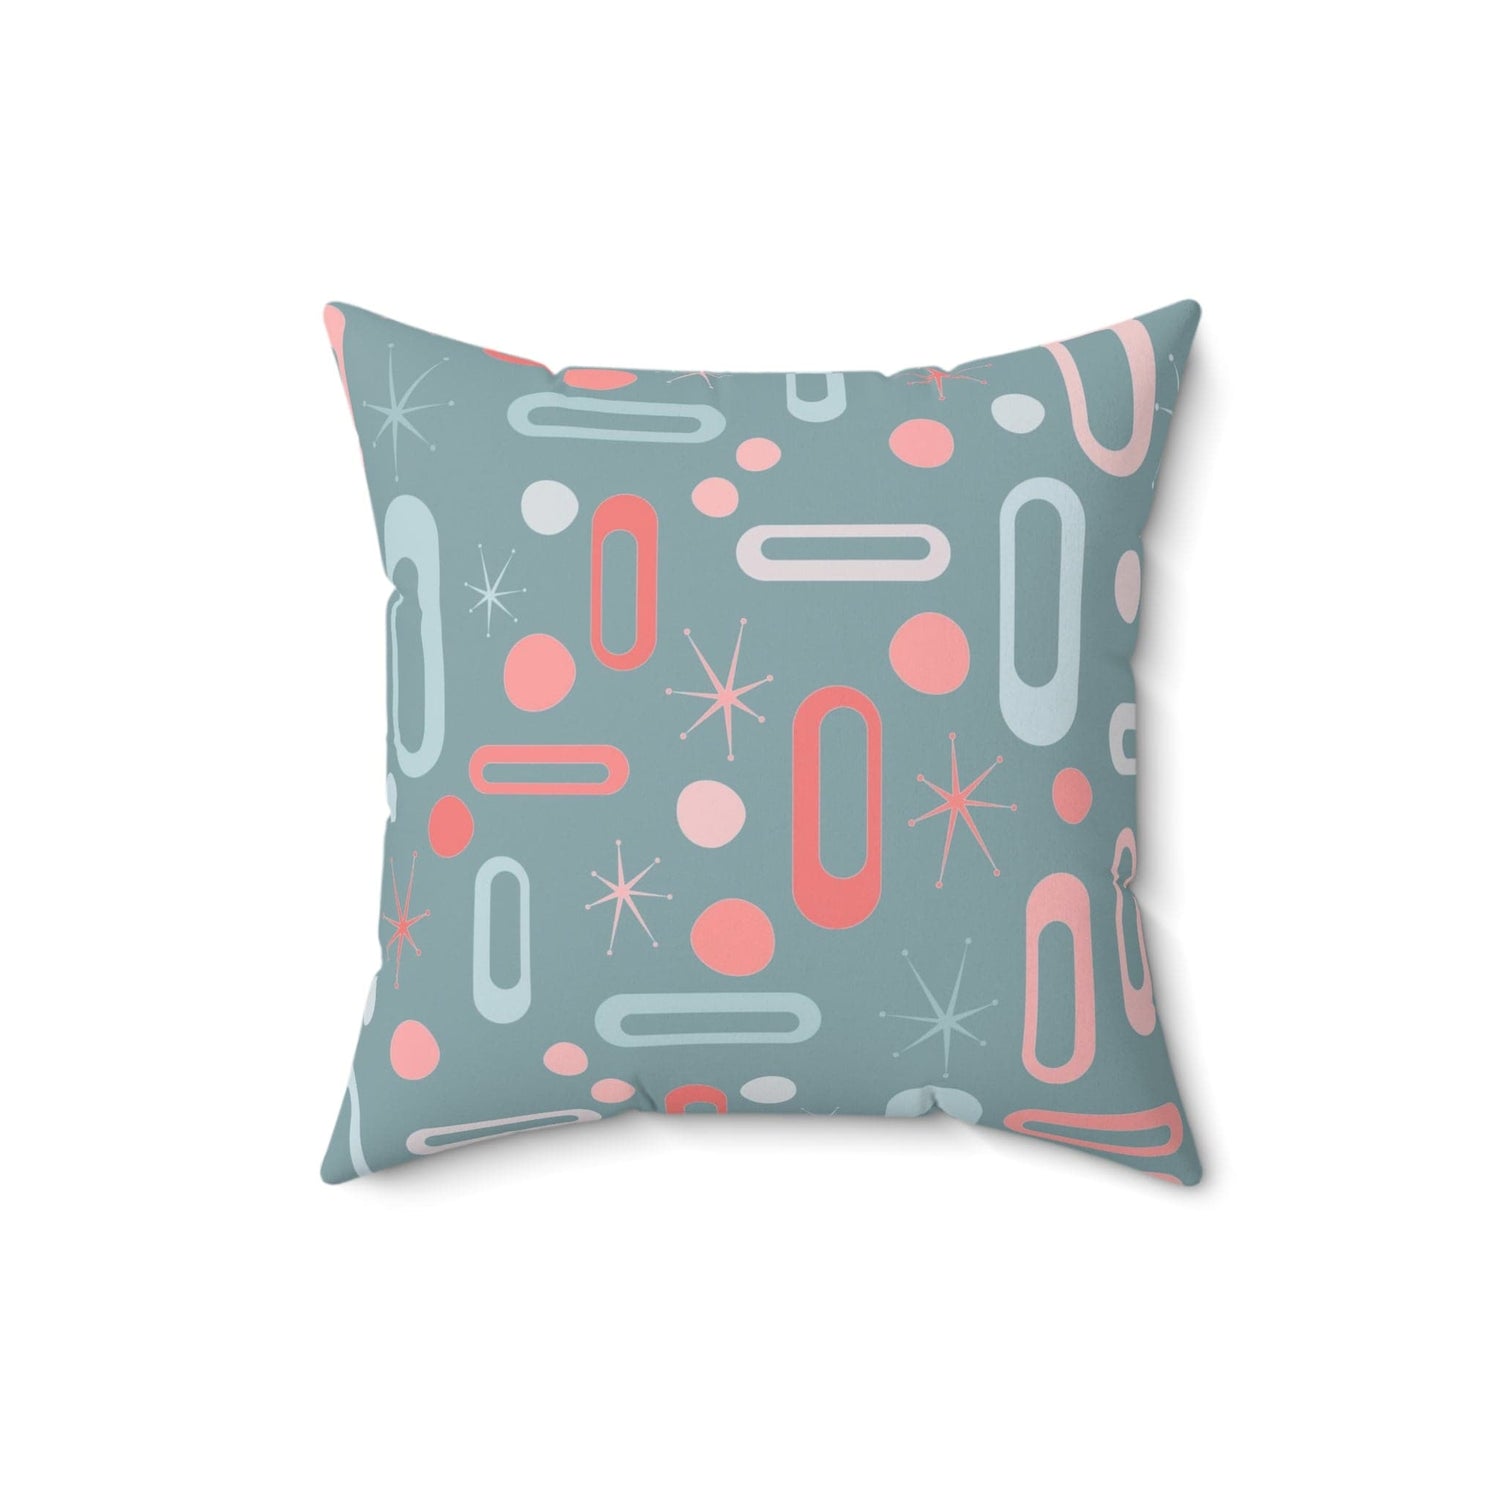 Mid Century Modern Pillow, Ice Blue, Pink, Coral, Geometric Designs, Atomic Starburst MCM Retro Home Decor Pillow And Insert Home Decor 16&quot; × 16&quot;